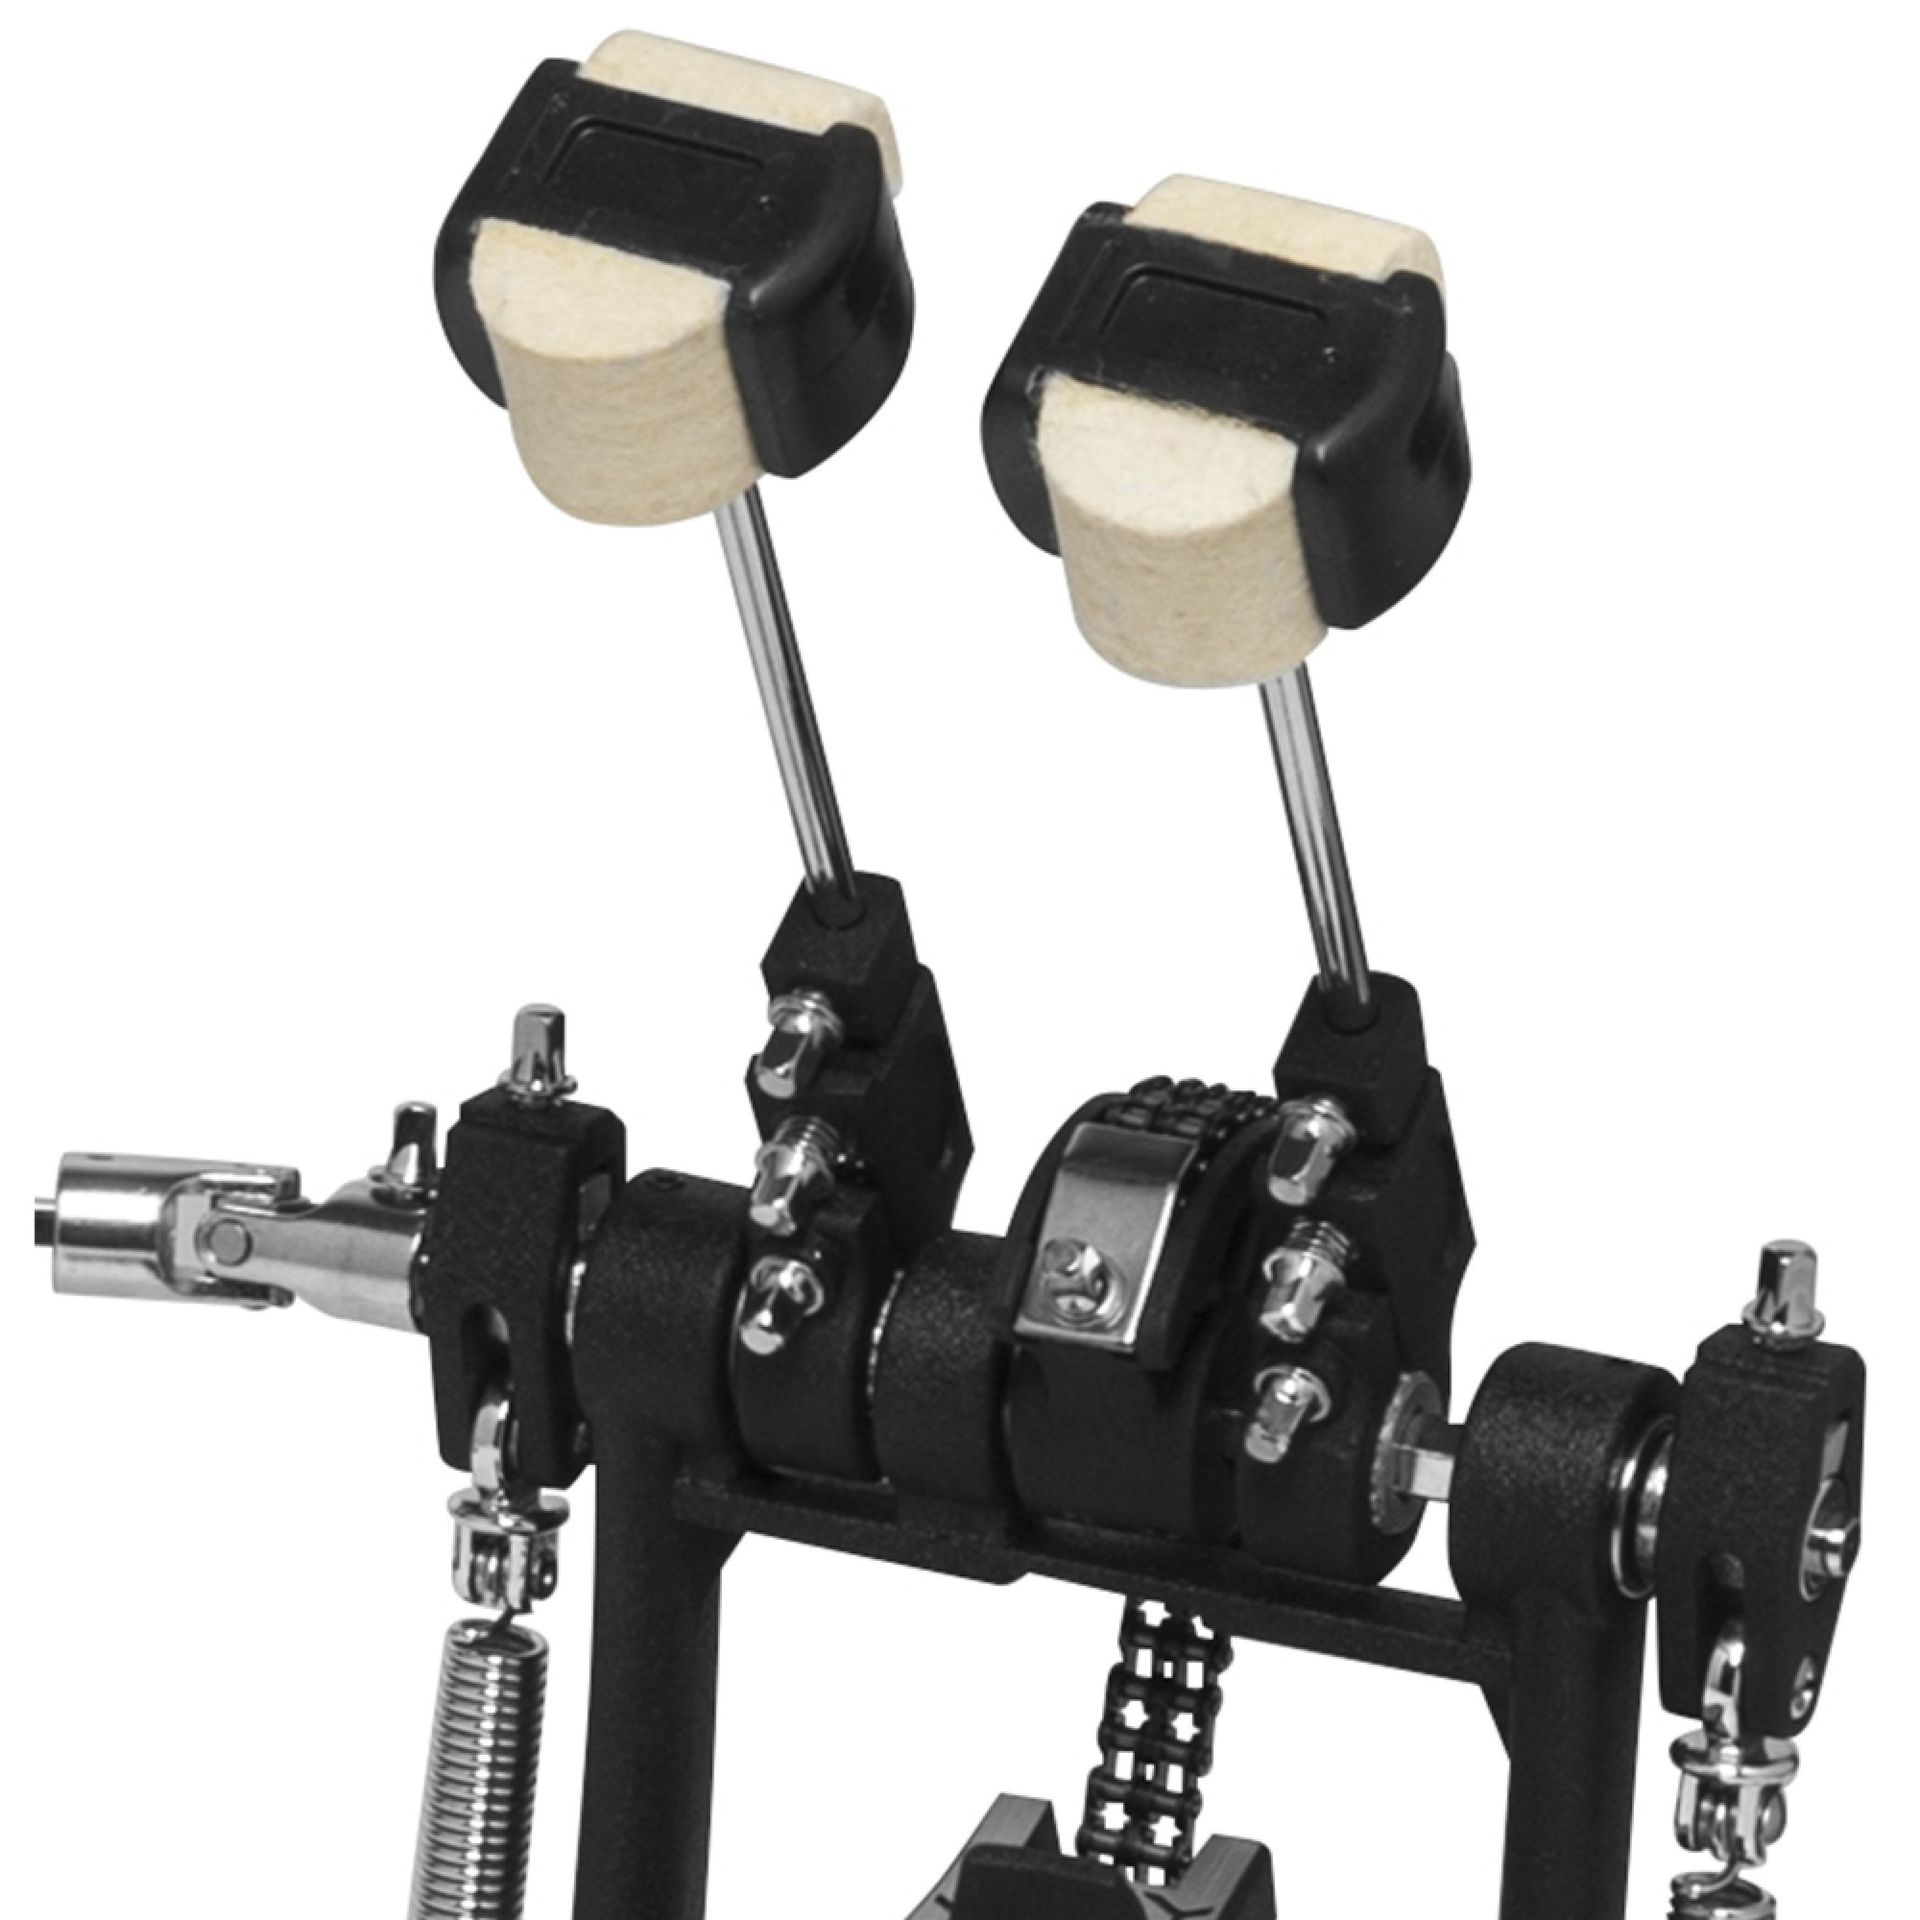 Stagg Doppel Bassdrum Pedal, 52 Serie, PPD-52